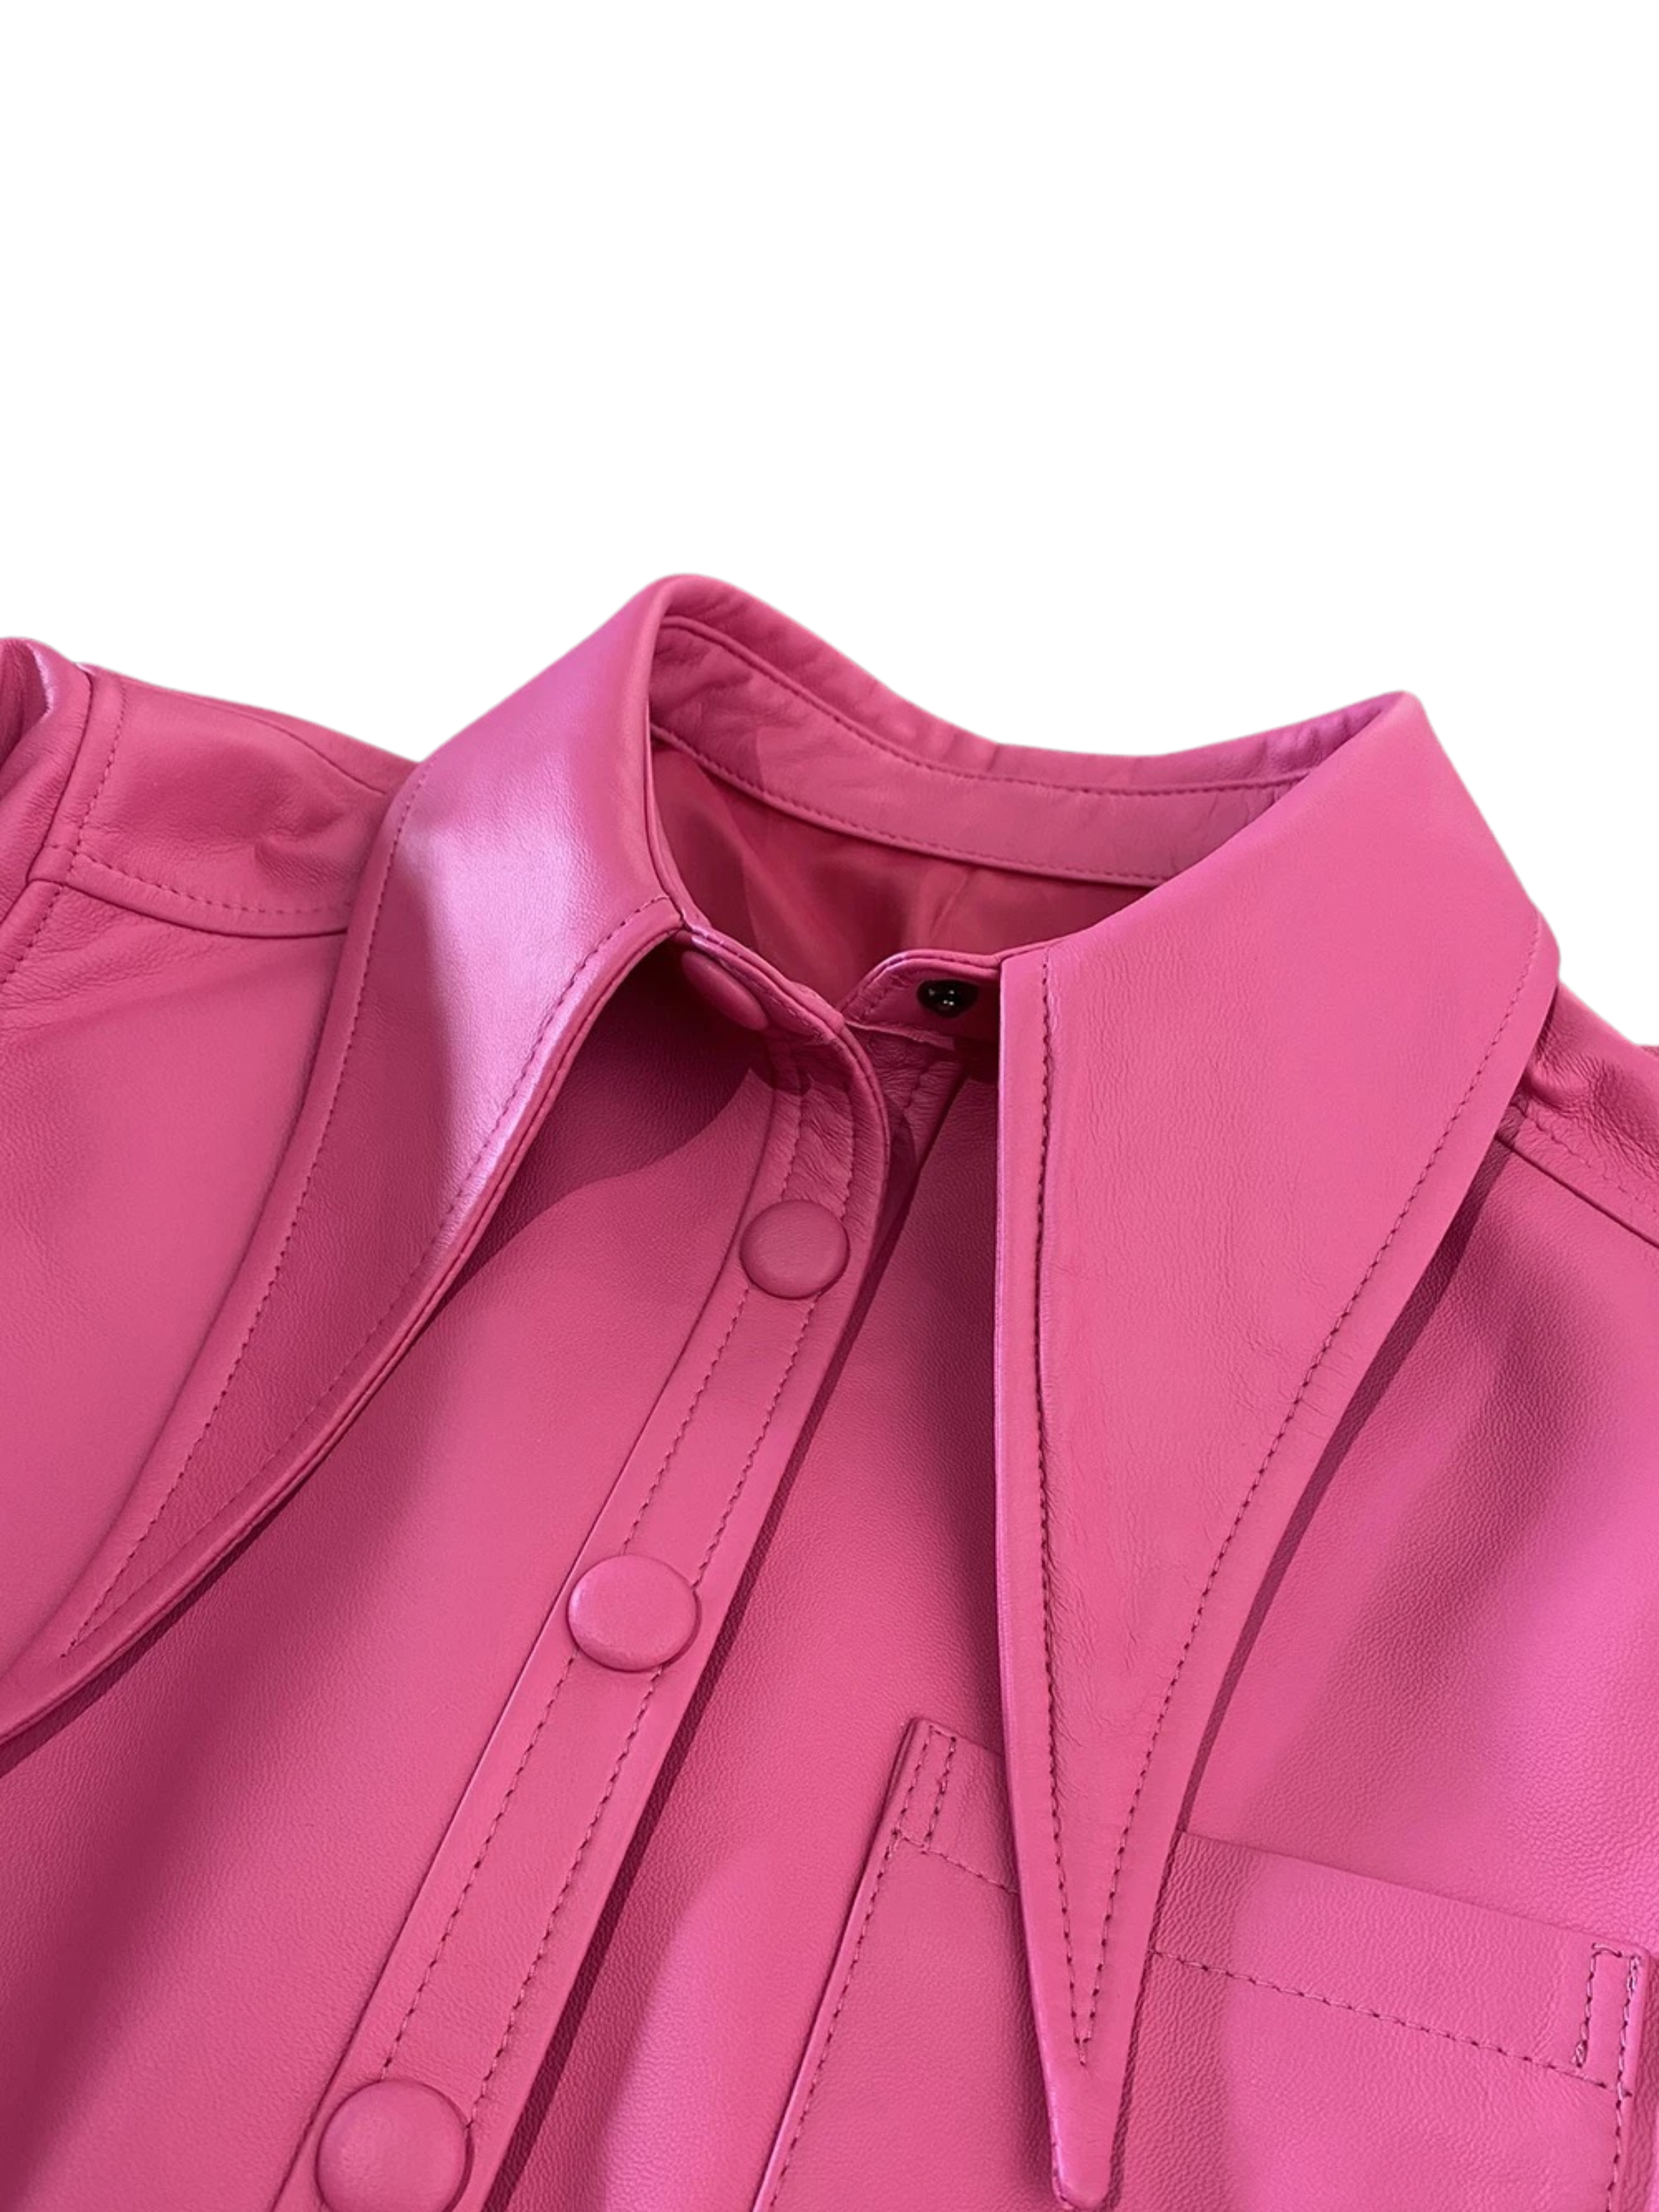 GOLDxTEAL pink leather shirt.